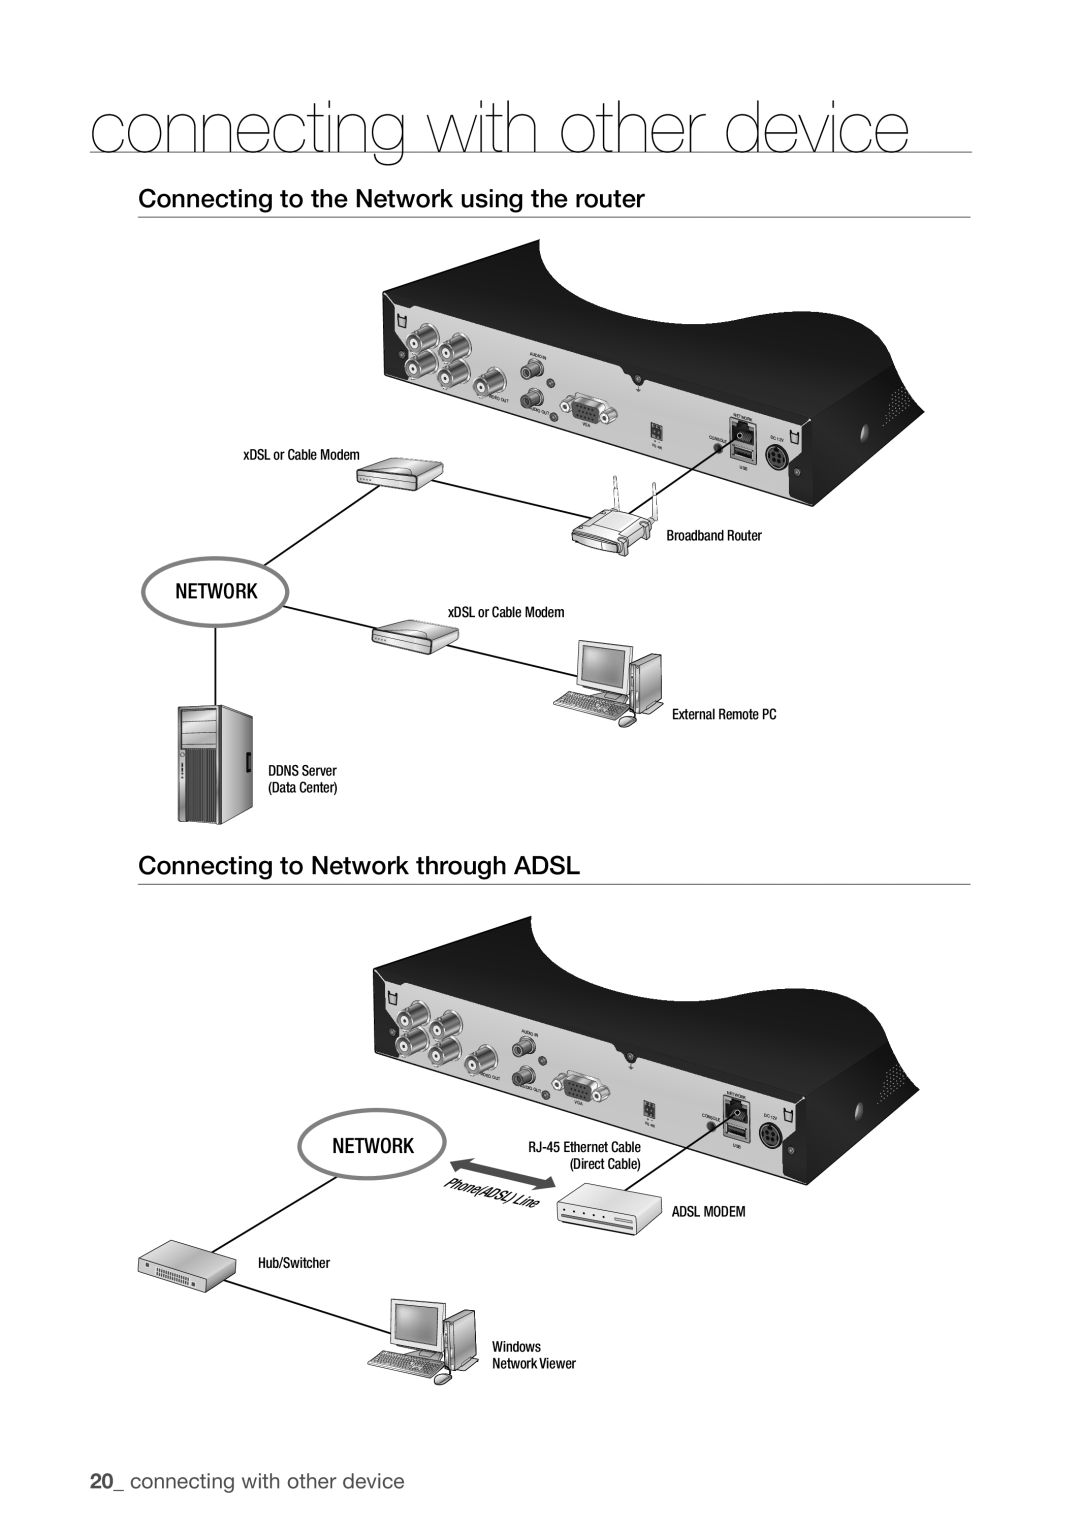 Samsung SDR3100 Connecting to the Network using the router, Connecting to Network through ADSL, Direct Cable, PhoneADSL 